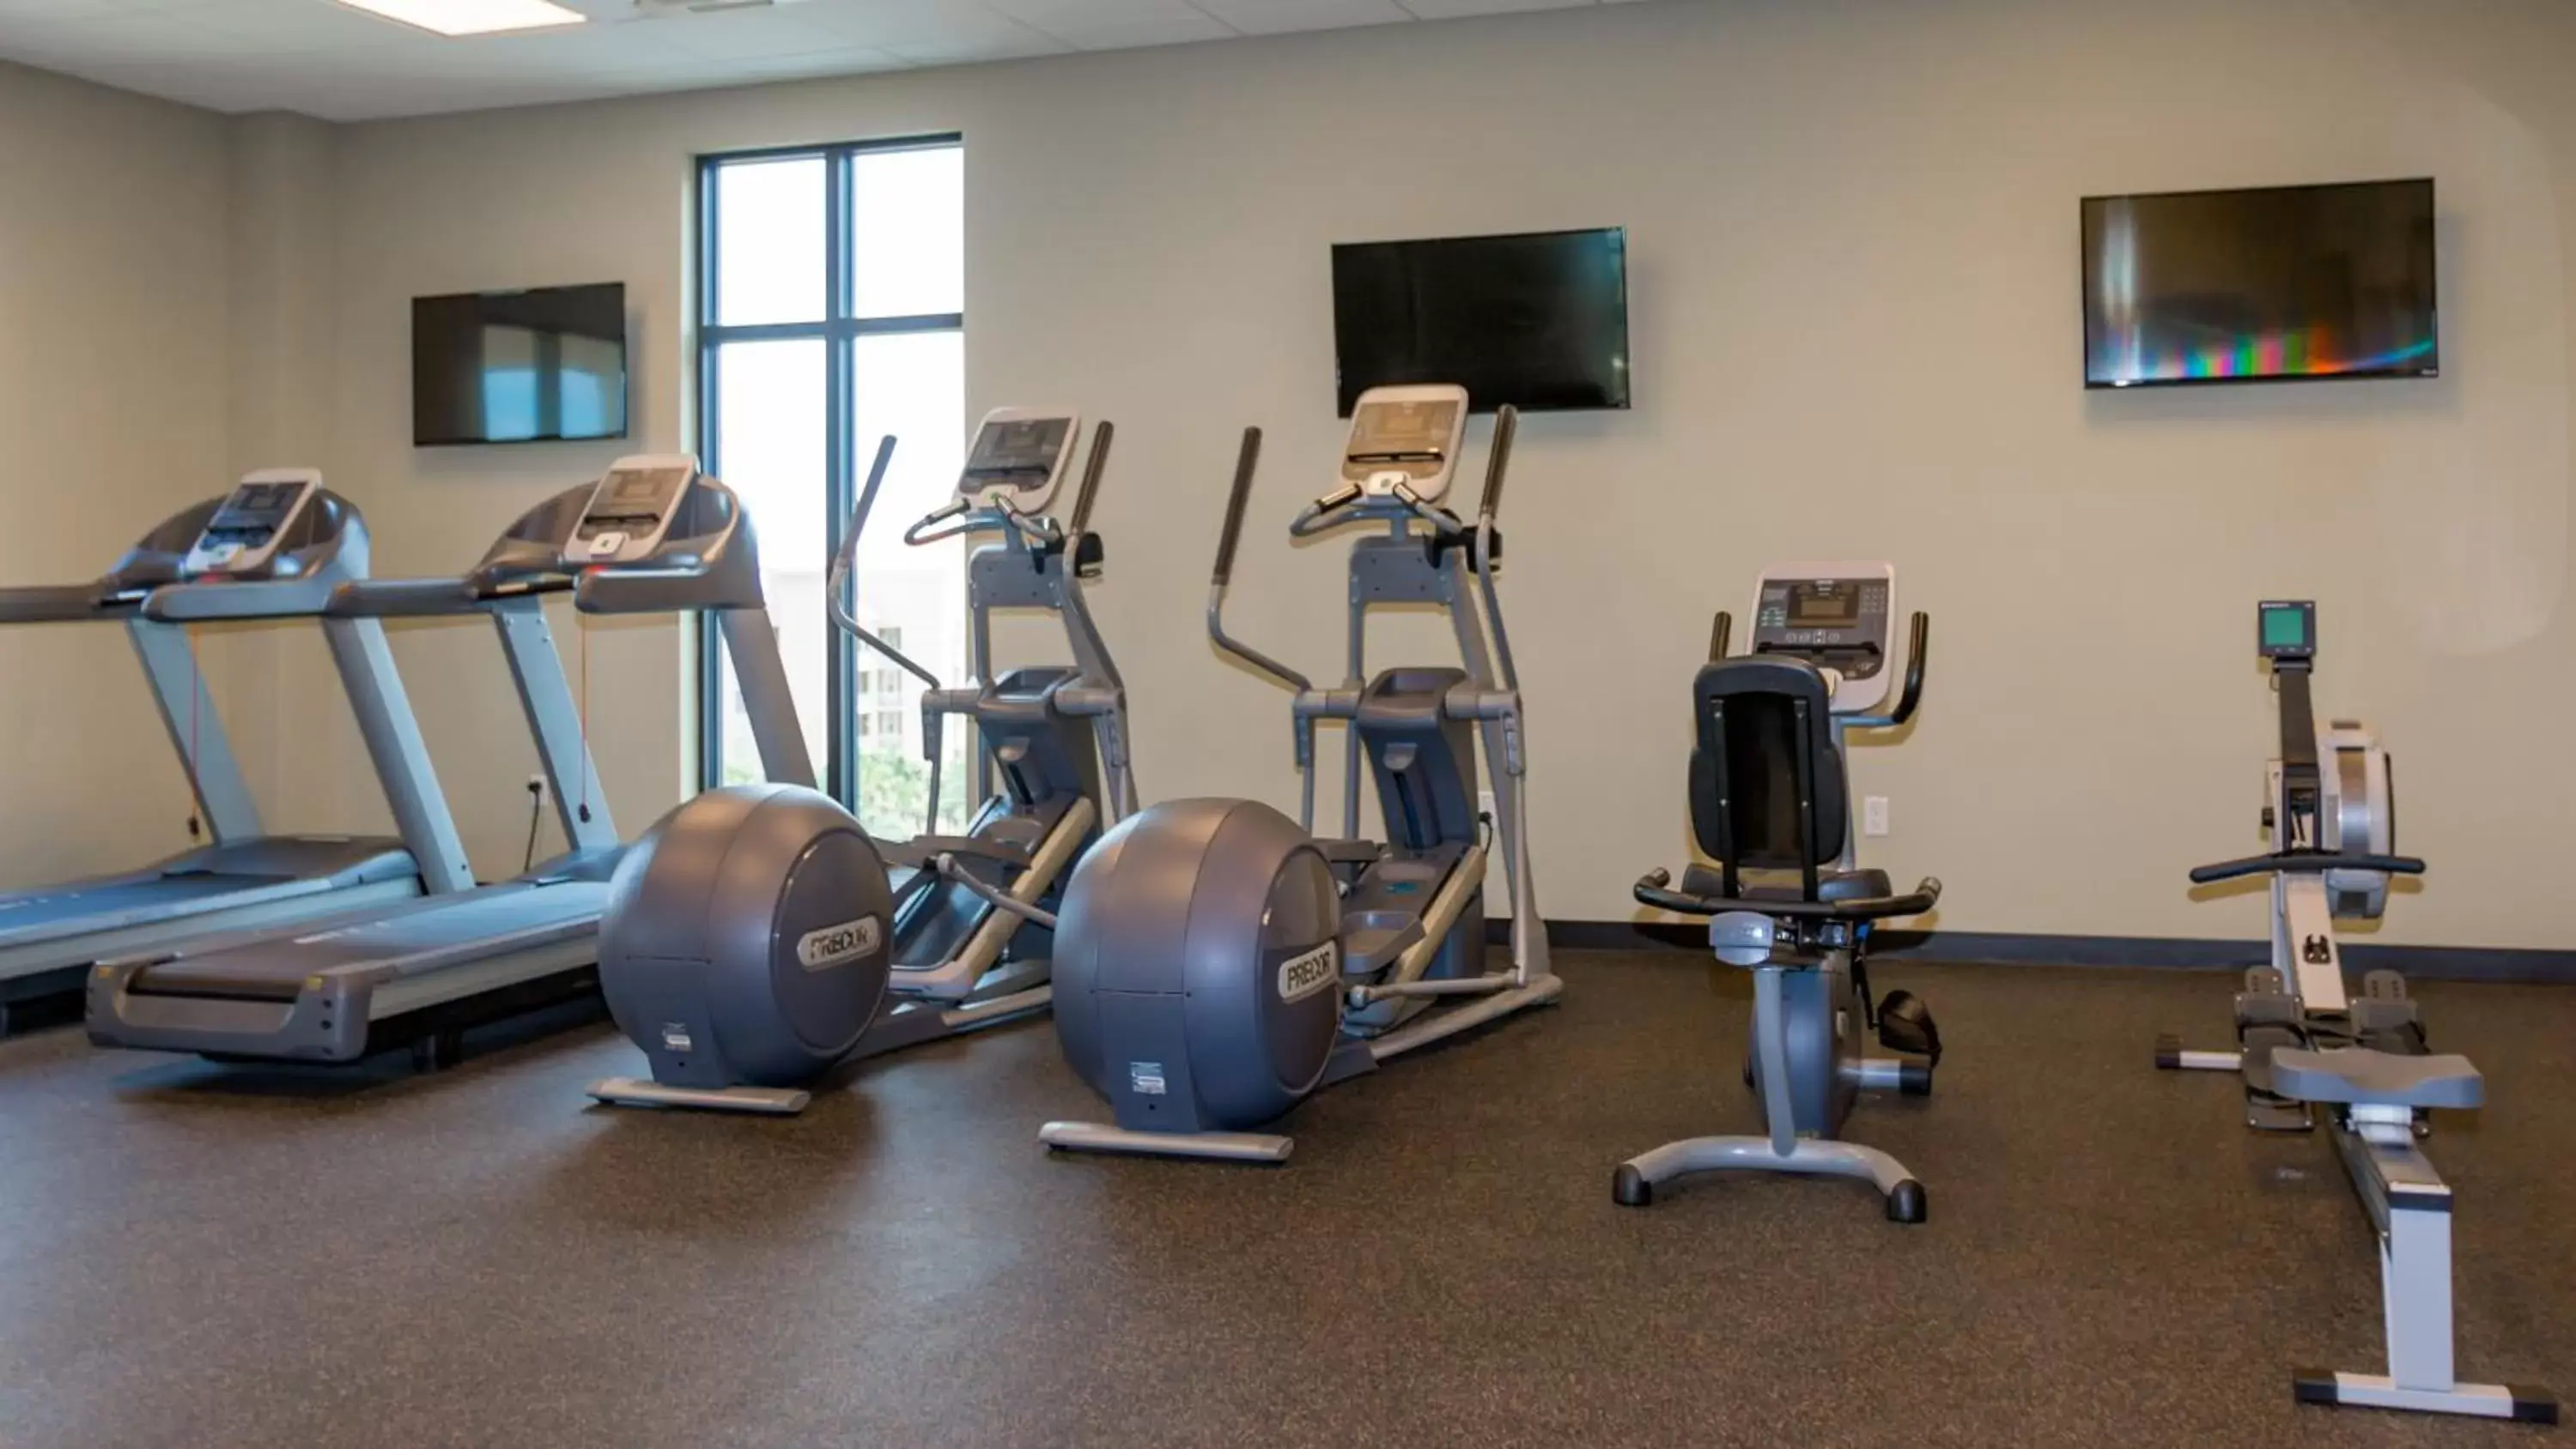 Fitness centre/facilities in Edge Hotel Clearwater Beach